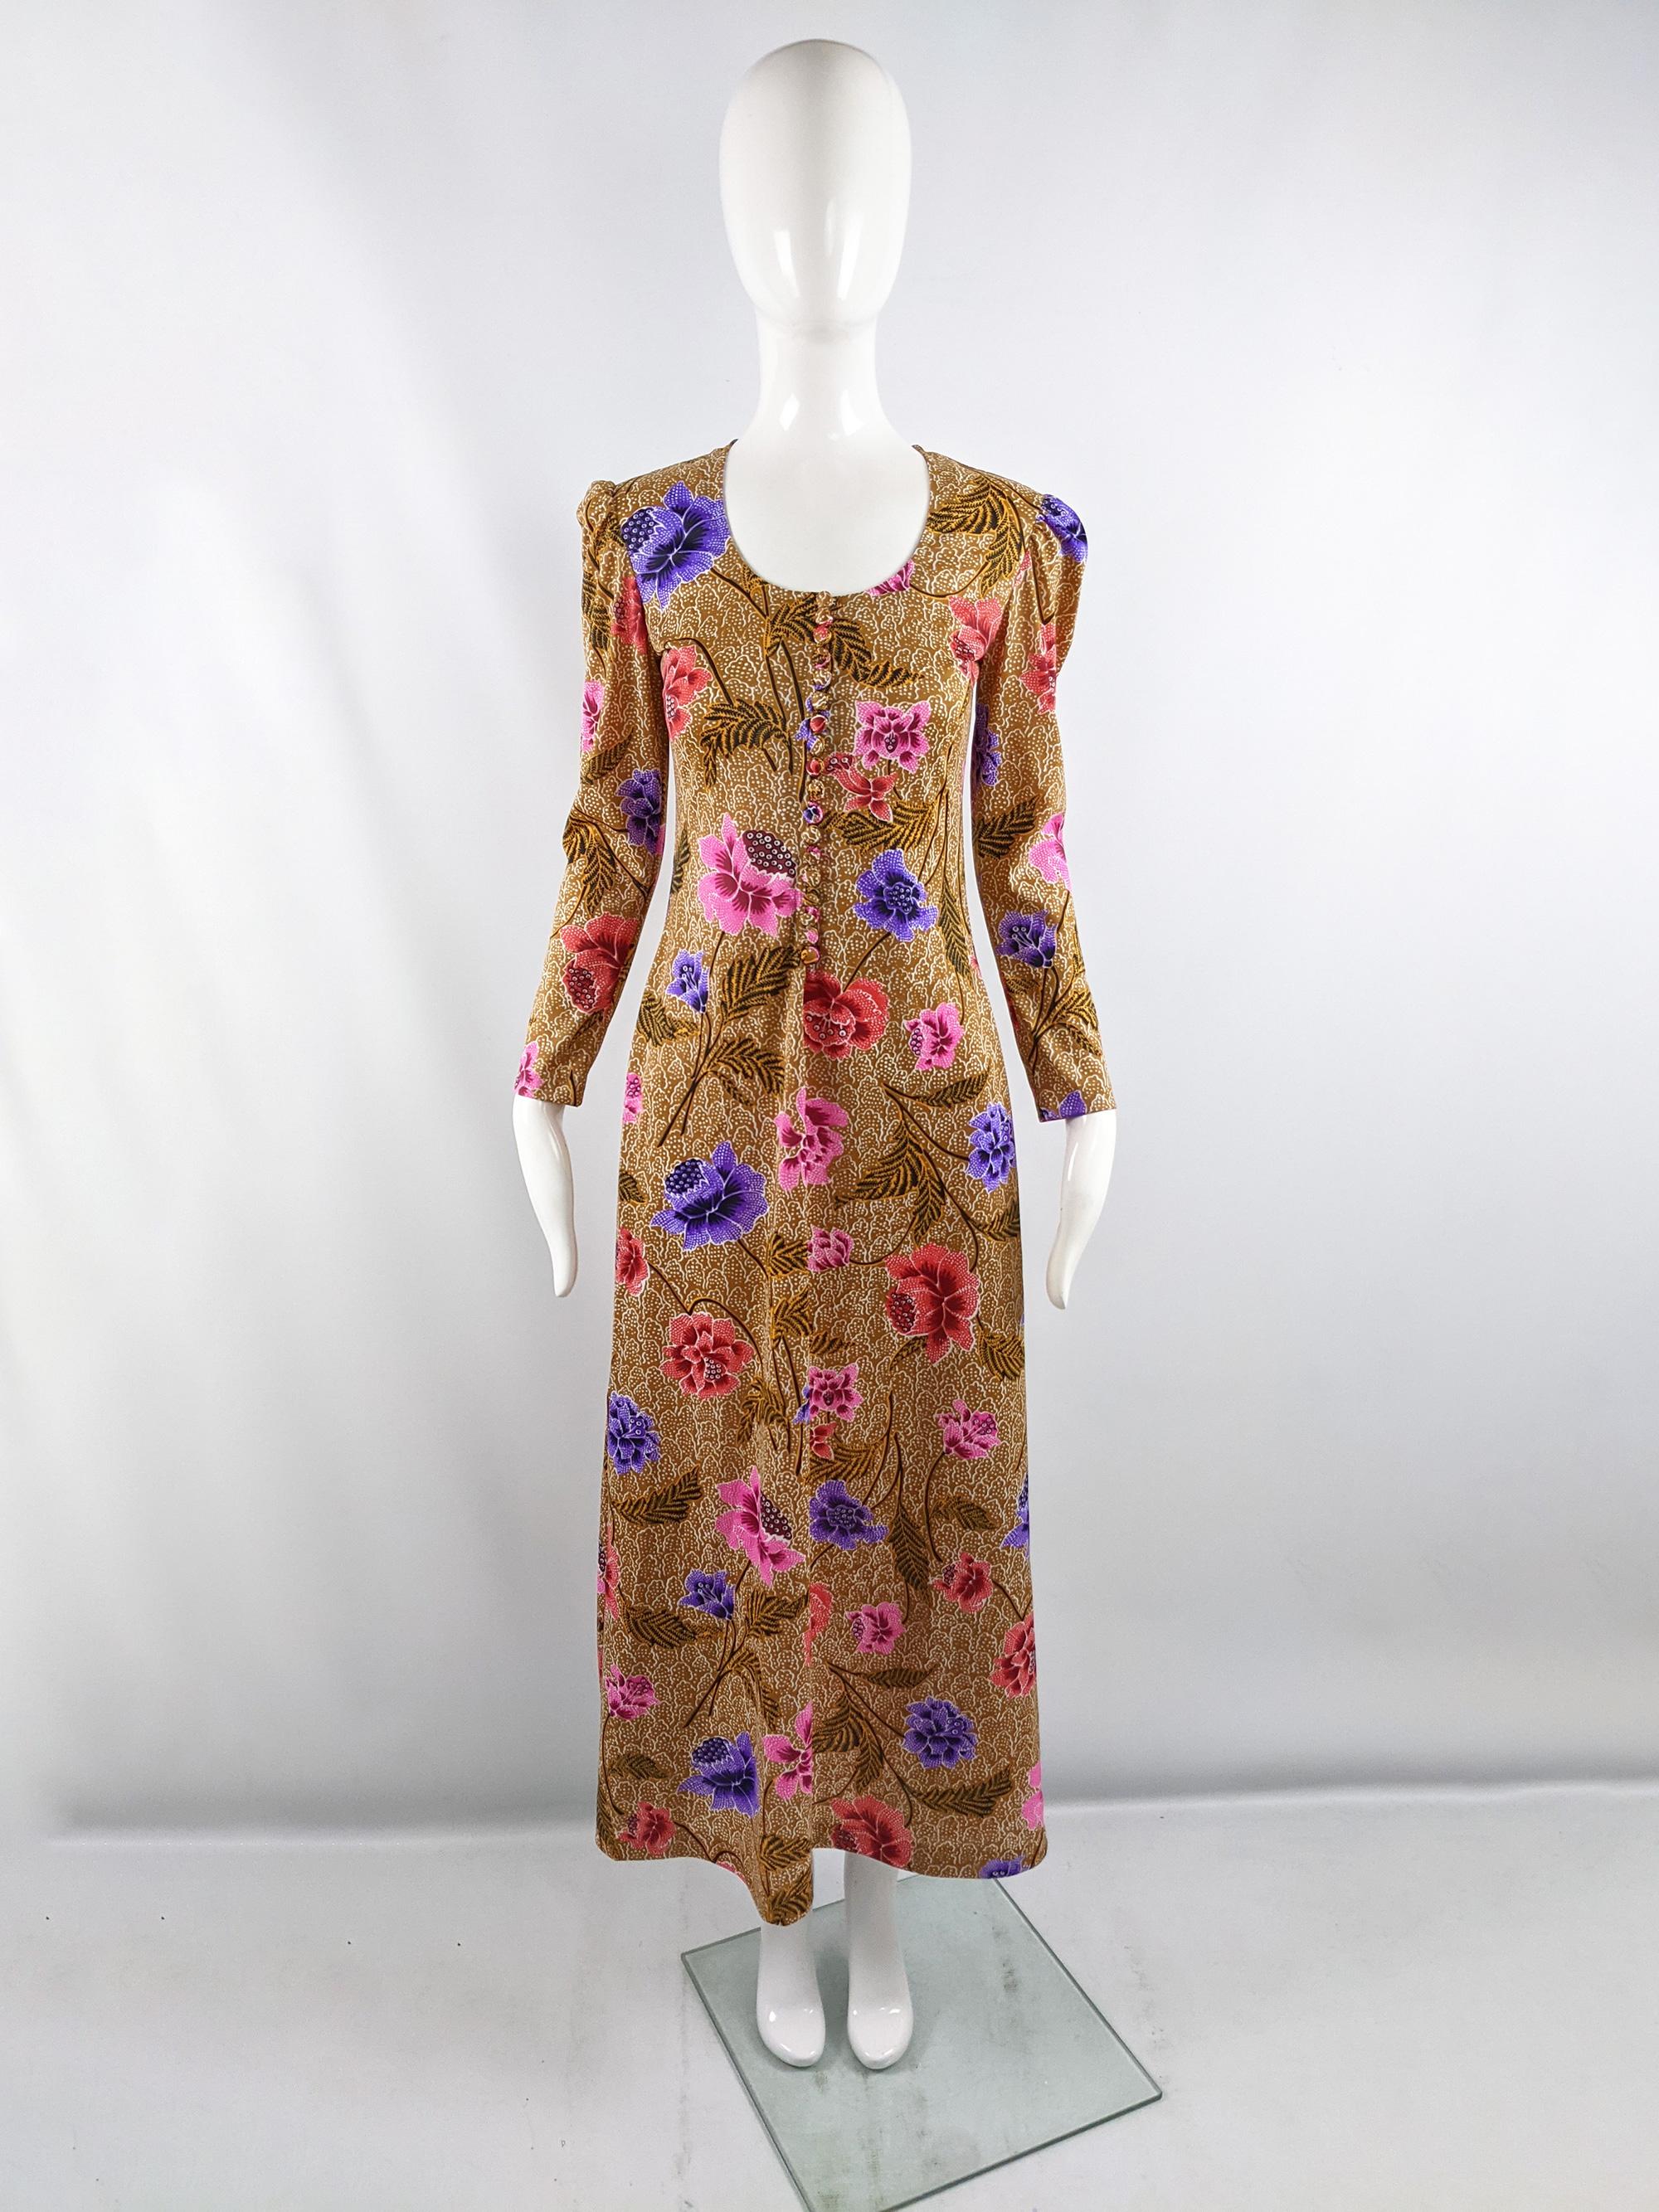 A fabulous vintage womens maxi dress from the 70s by luxury Israeli label, Gottex. Known for their luxurious beach cover ups and poolside dresses, this lightweight, long sleeve floral print dress would be great for a summer vacation or festival.